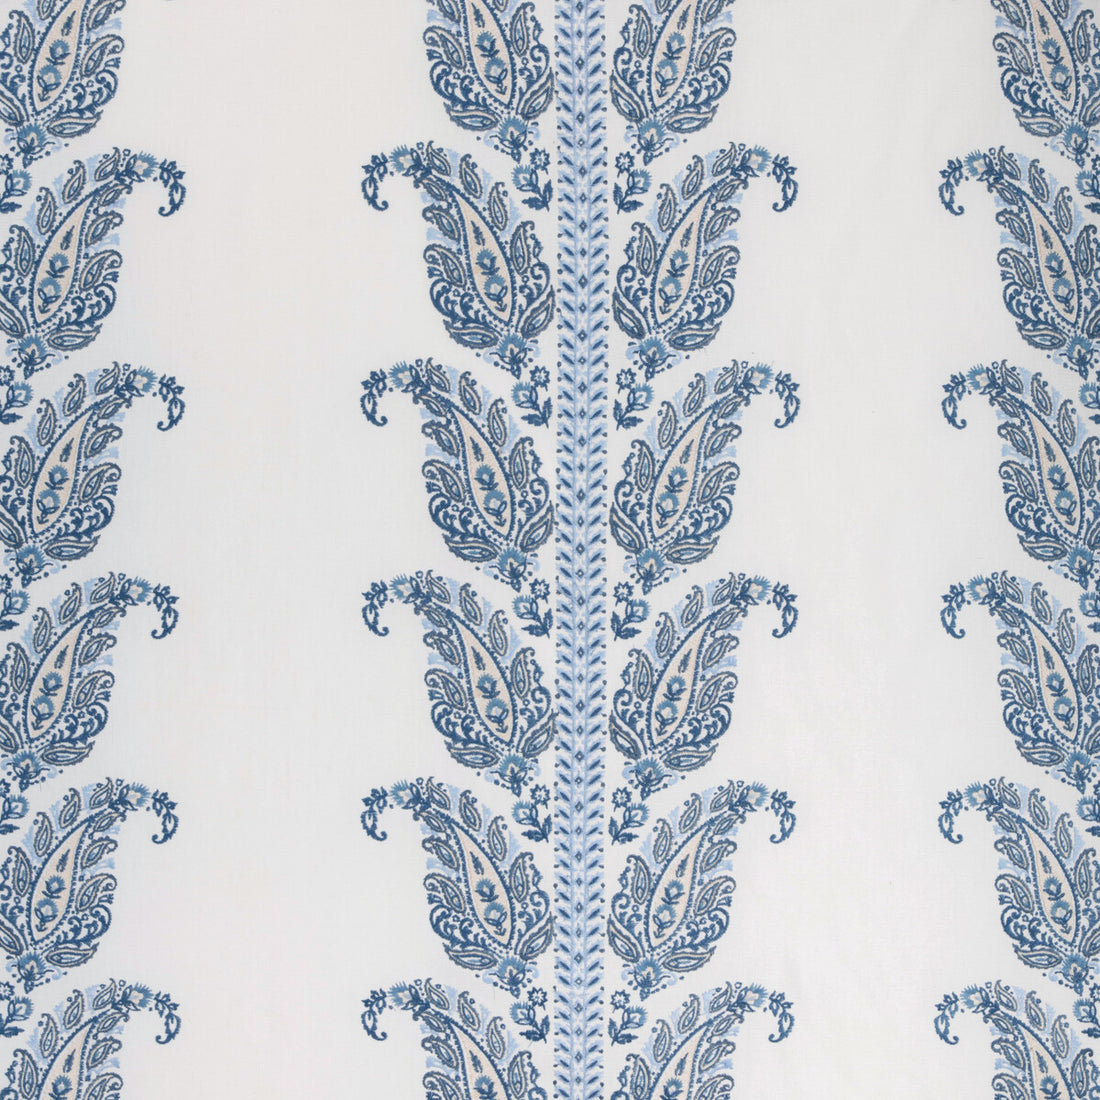 Yara Paisley Emb fabric in sky color - pattern 8023112.115.0 - by Brunschwig &amp; Fils in the Anduze Embroideries collection